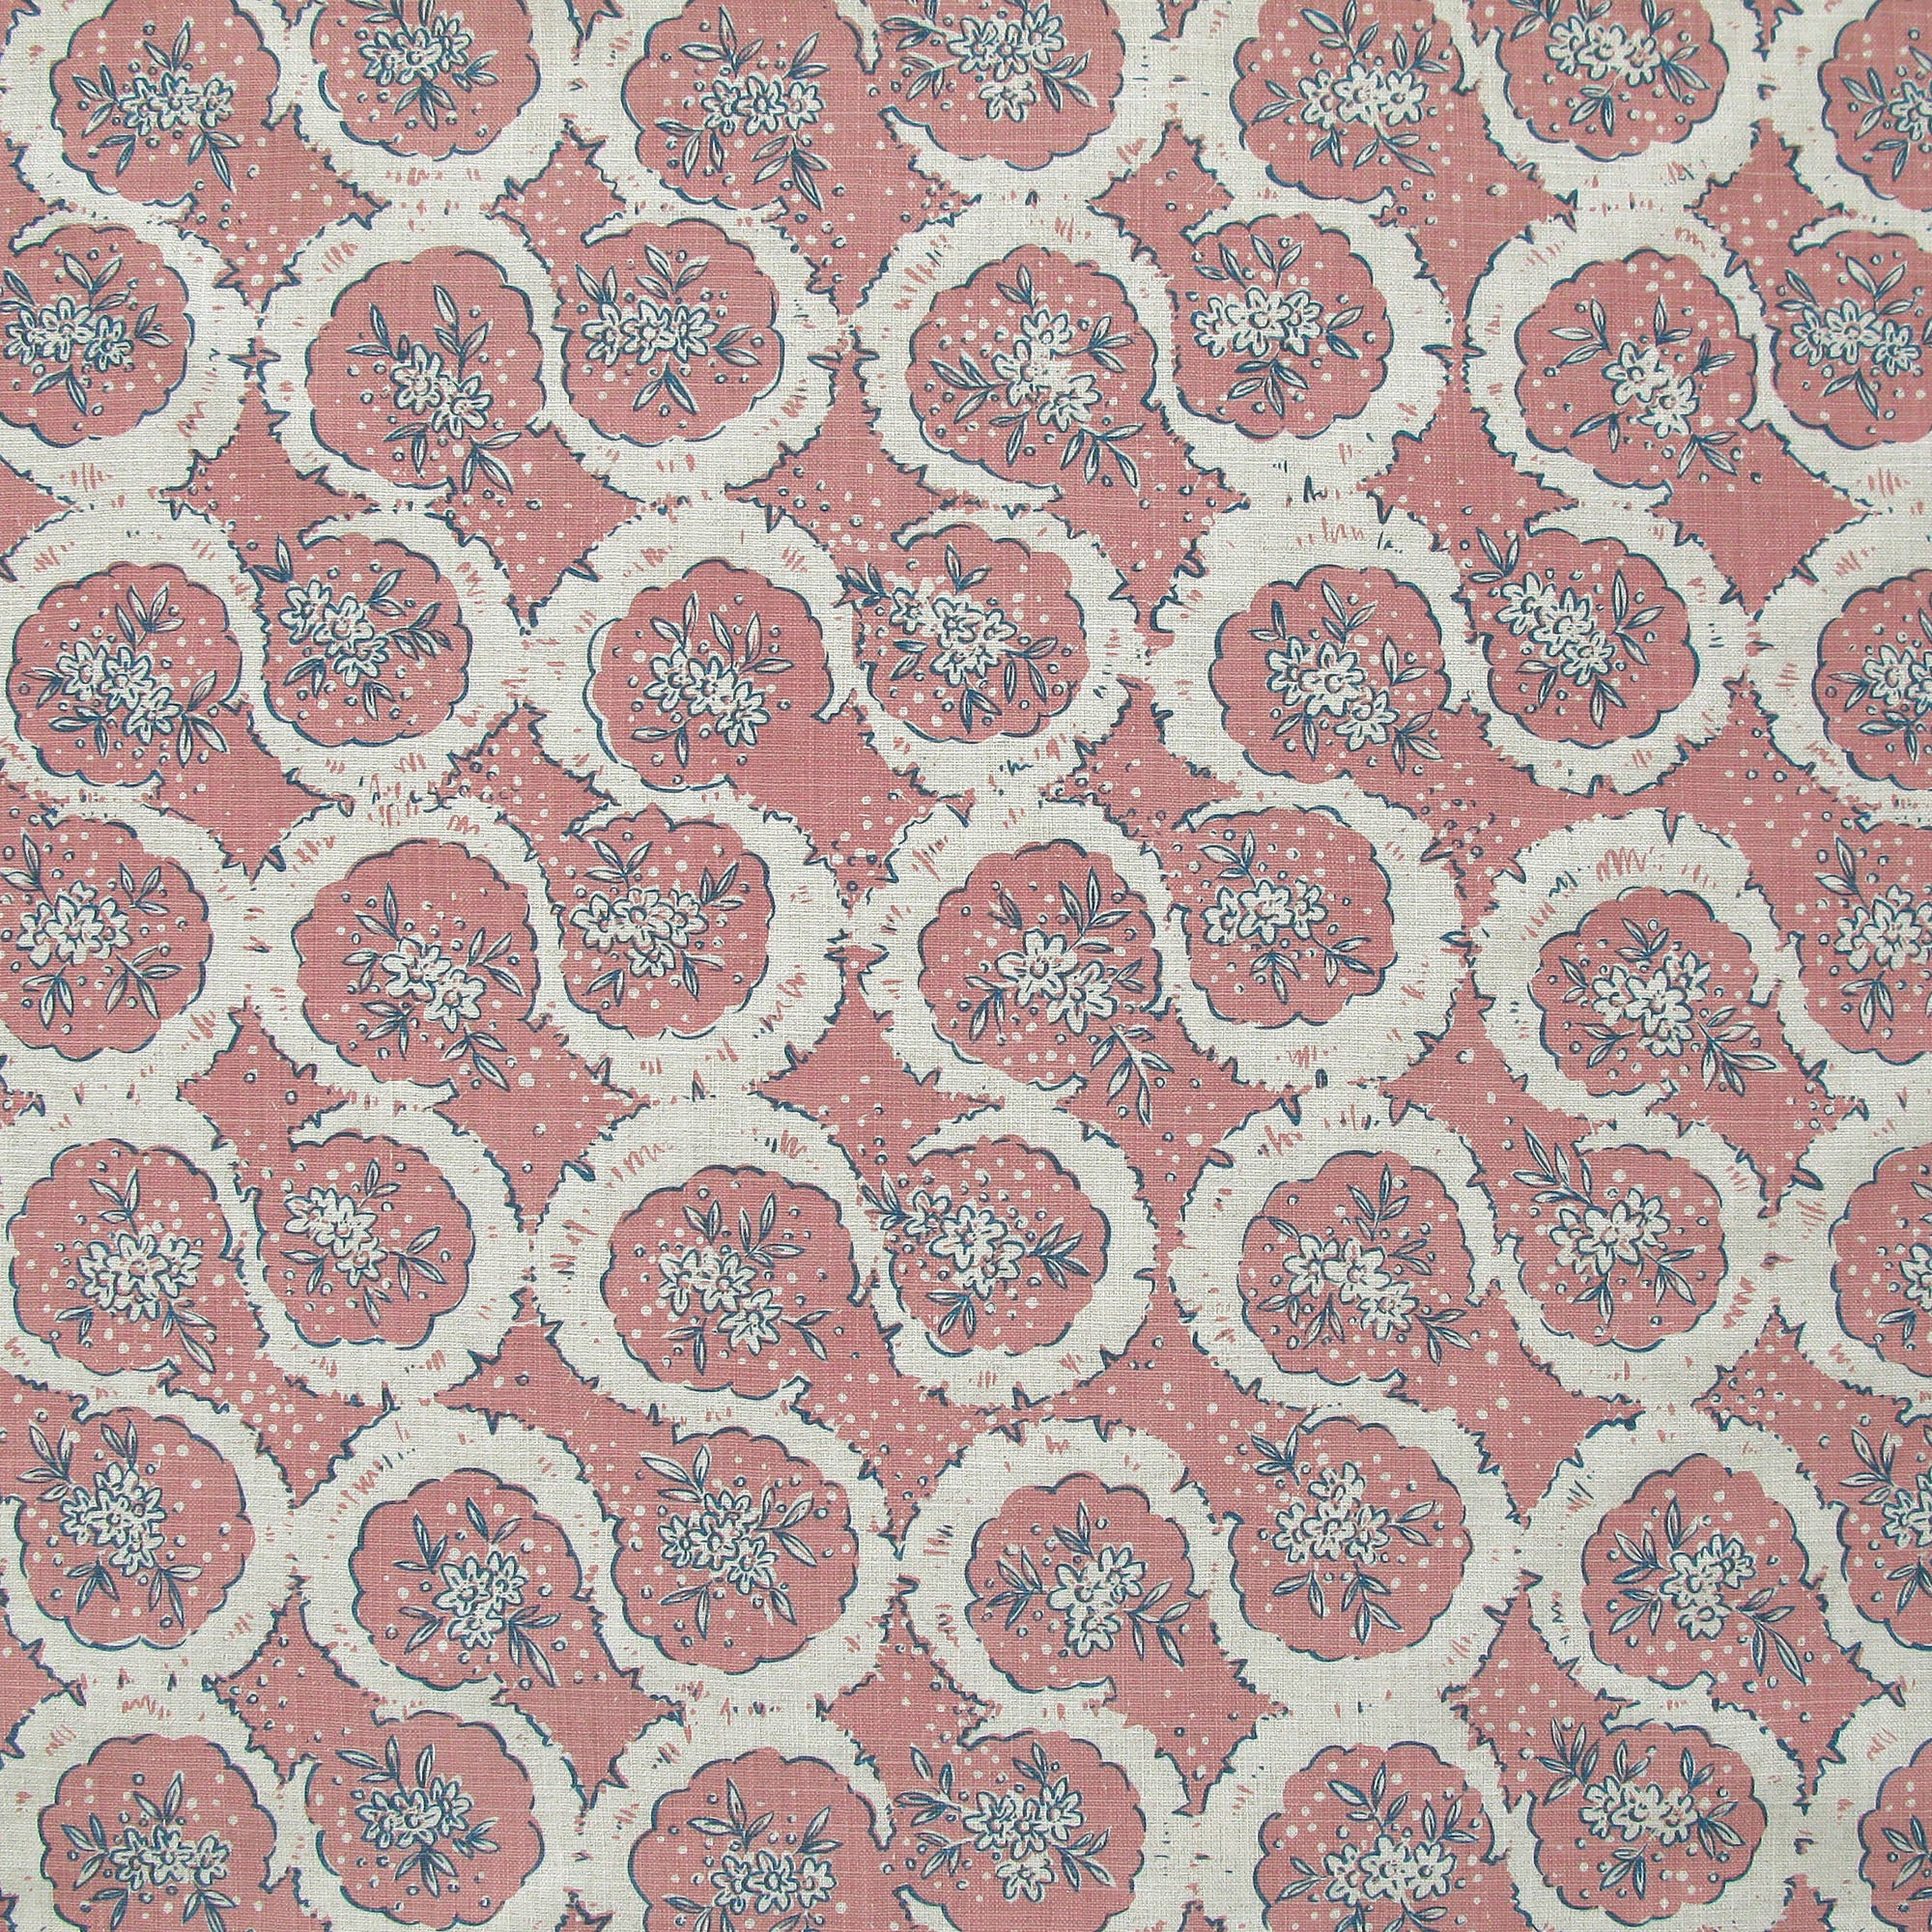 Detail of fabric in a meandering floral grid print in cream and navy on a light pink field.